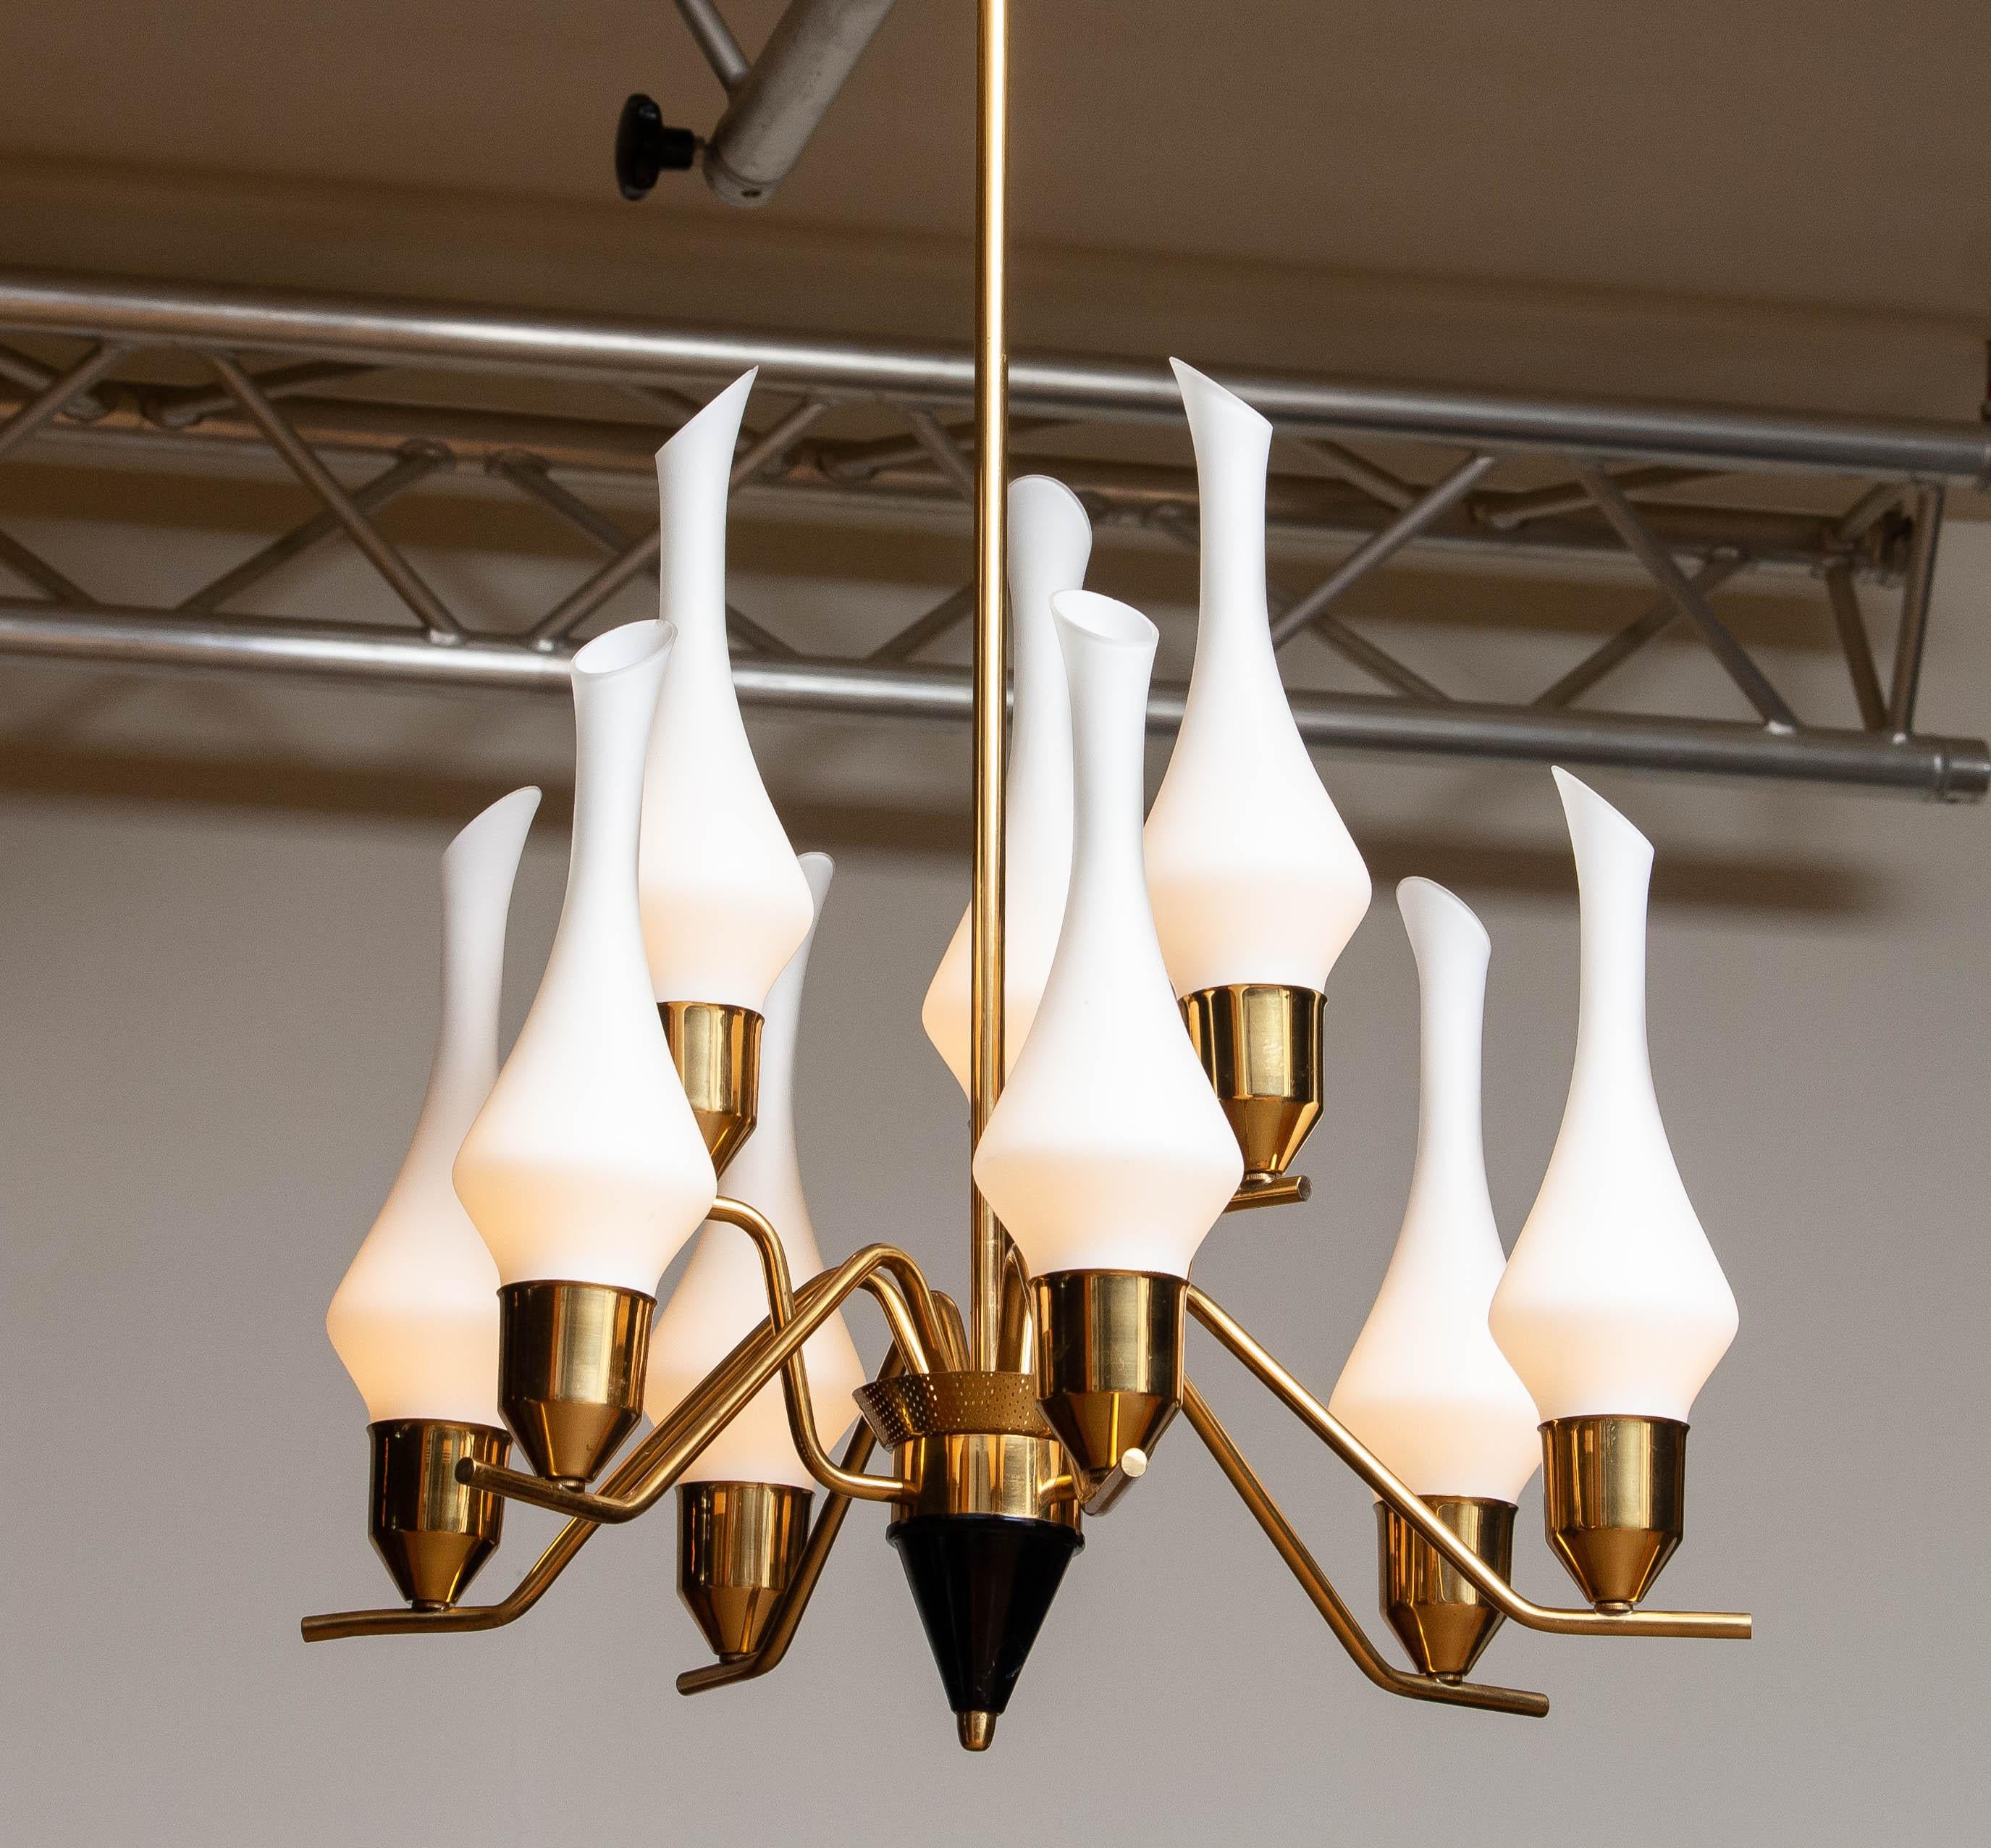 Scandinavian Modern 1960's Swedish Brass Chandelier with White Frosted Organic Glass Vases, ASEA